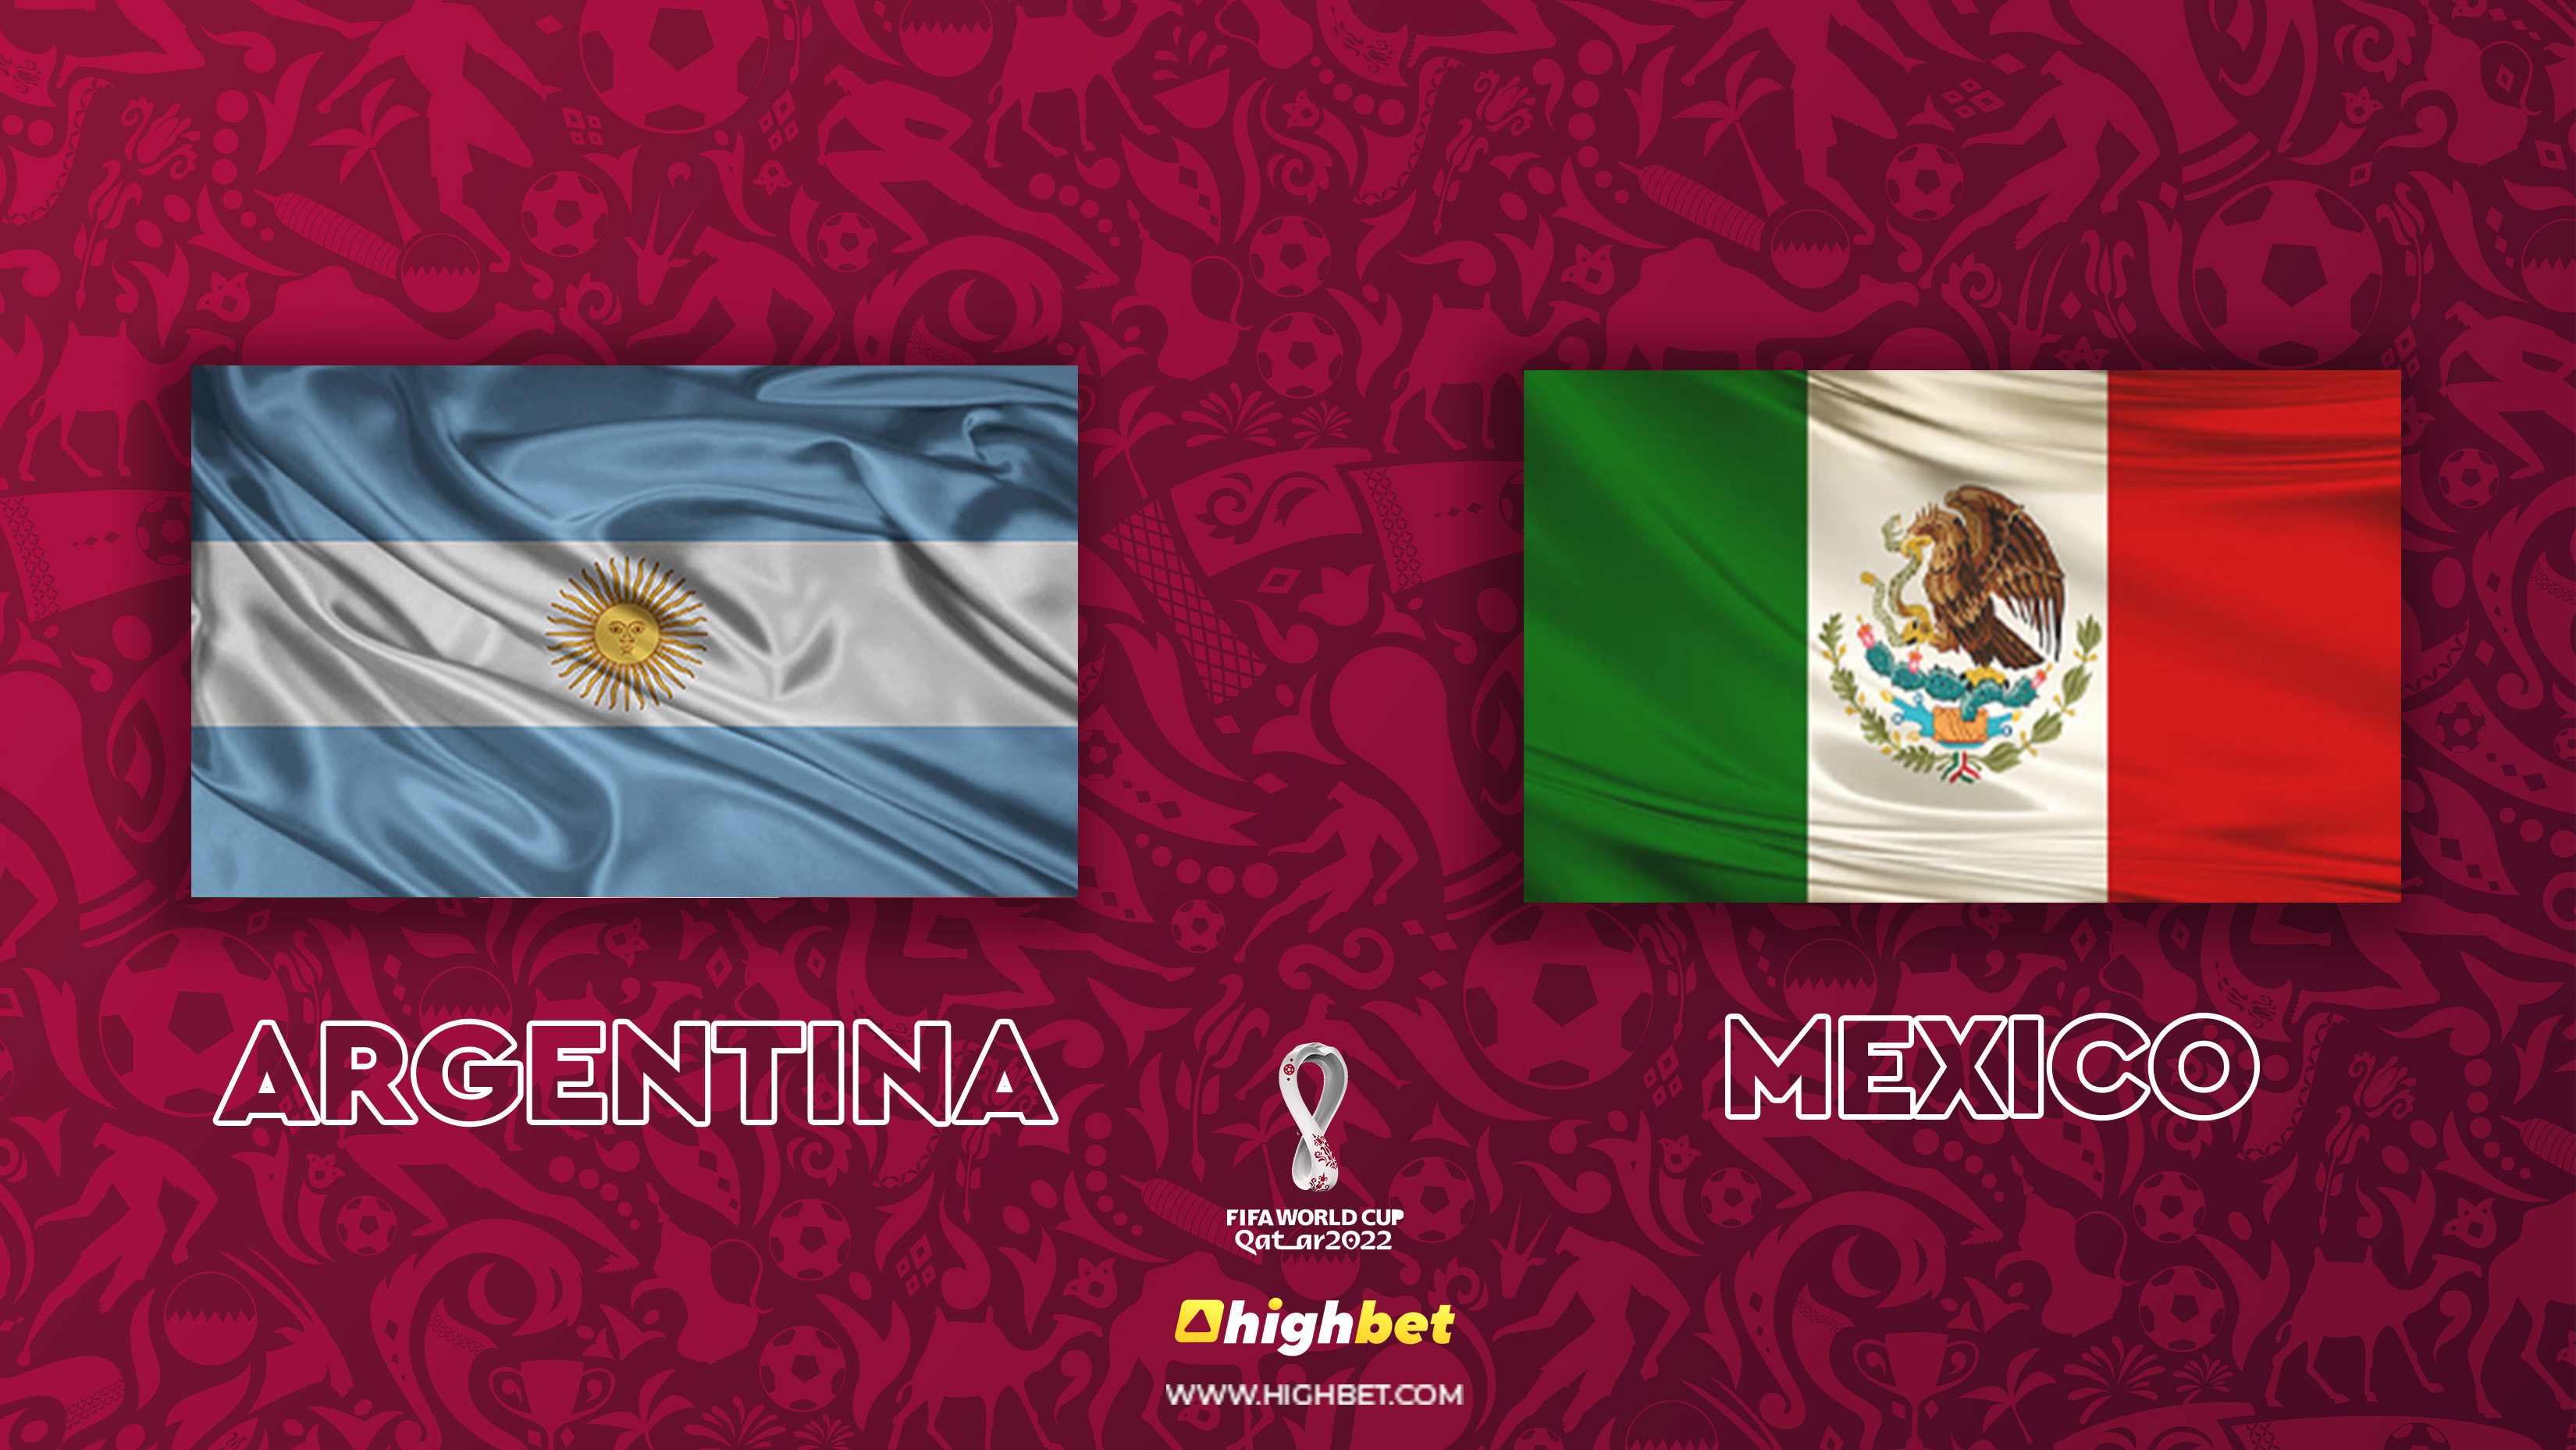 Argentina vs Mexico - highbet World Cup 2022 Pre-Match Analysis